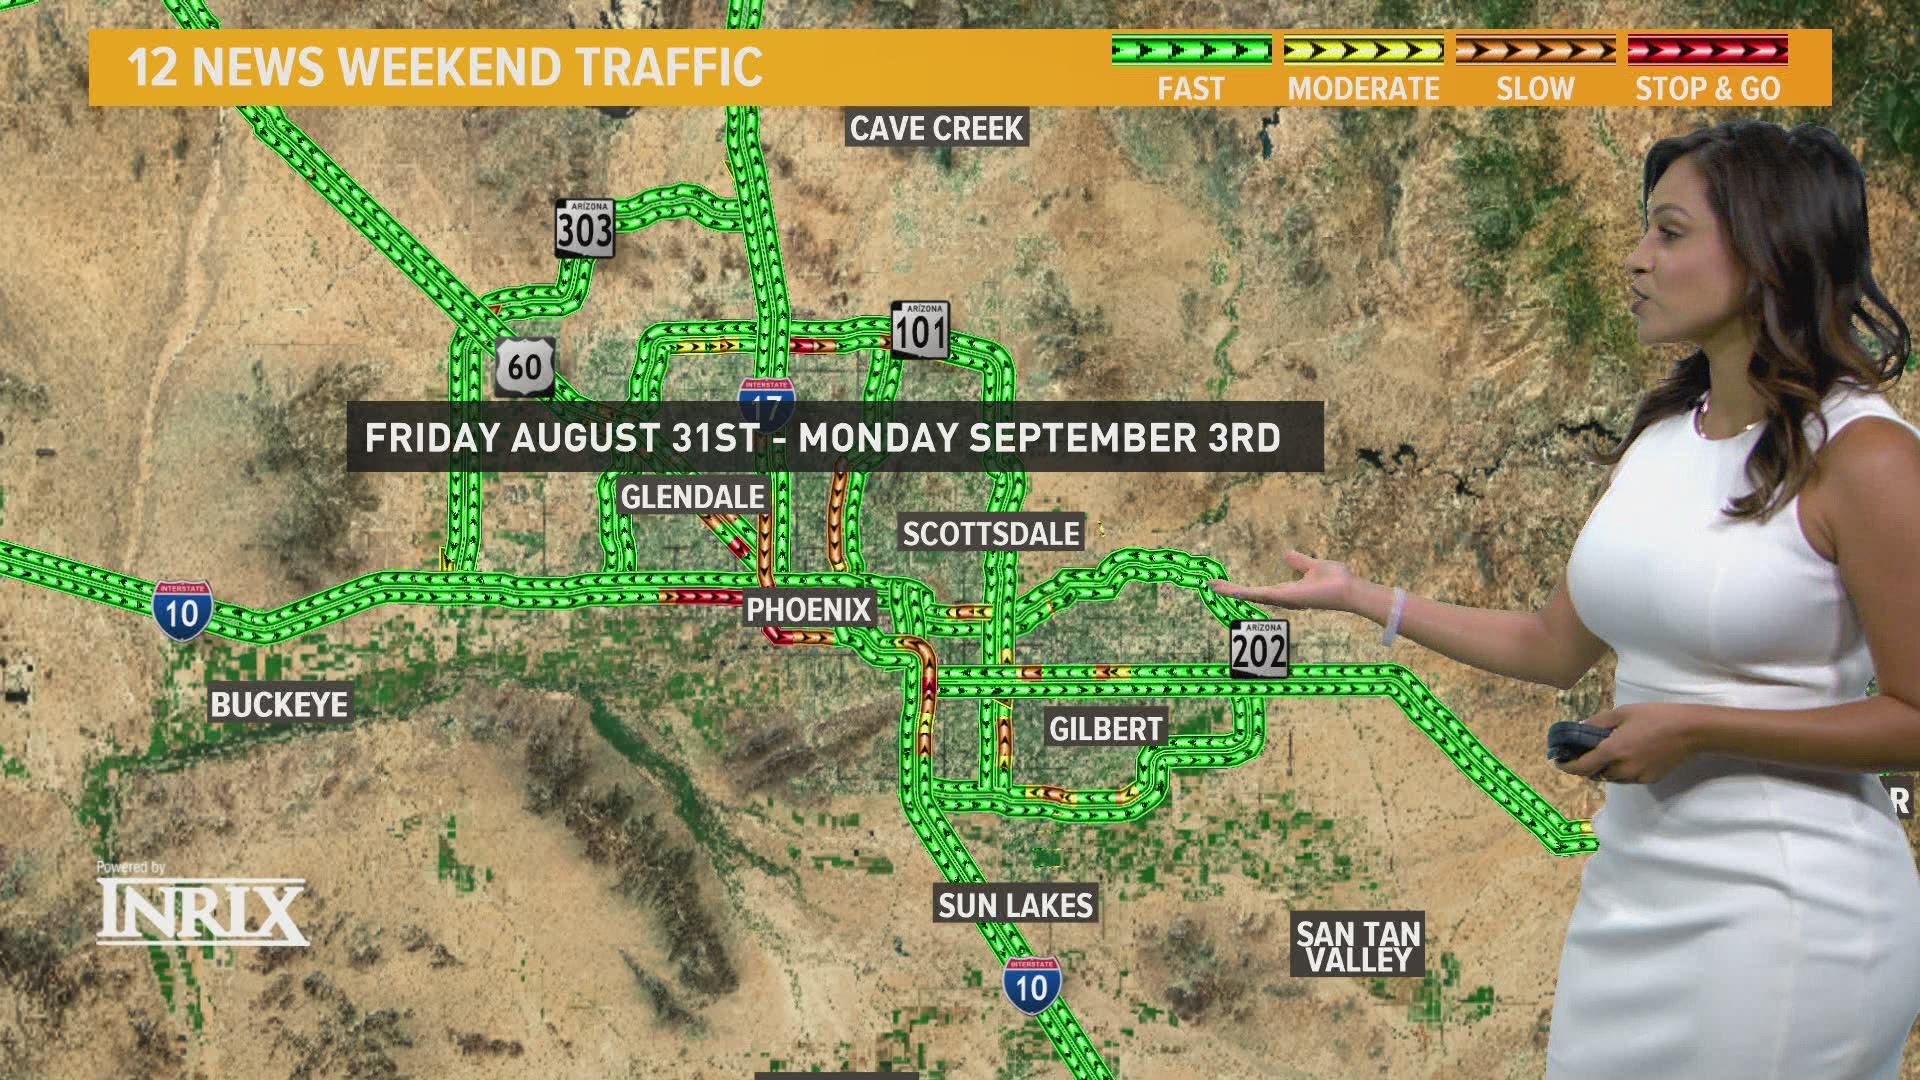 There are no freeway closures this Labor Day weekend, but here are some safety tips from ADOT.